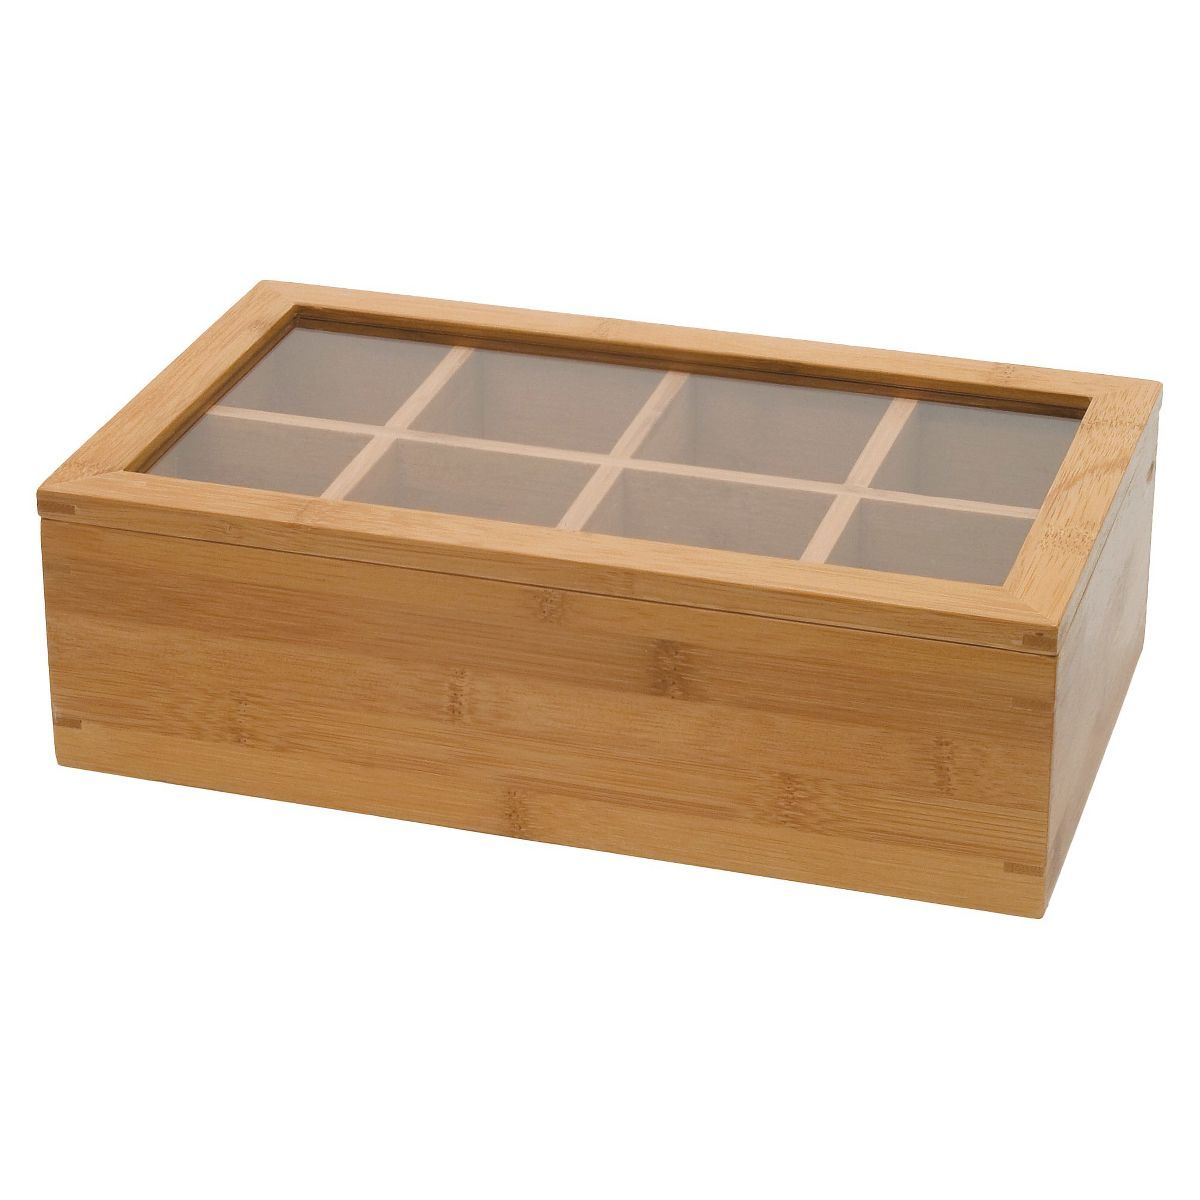 Bamboo 8-Compartment Tea Box with Acrylic and Bamboo Lid - Lipper International | Target